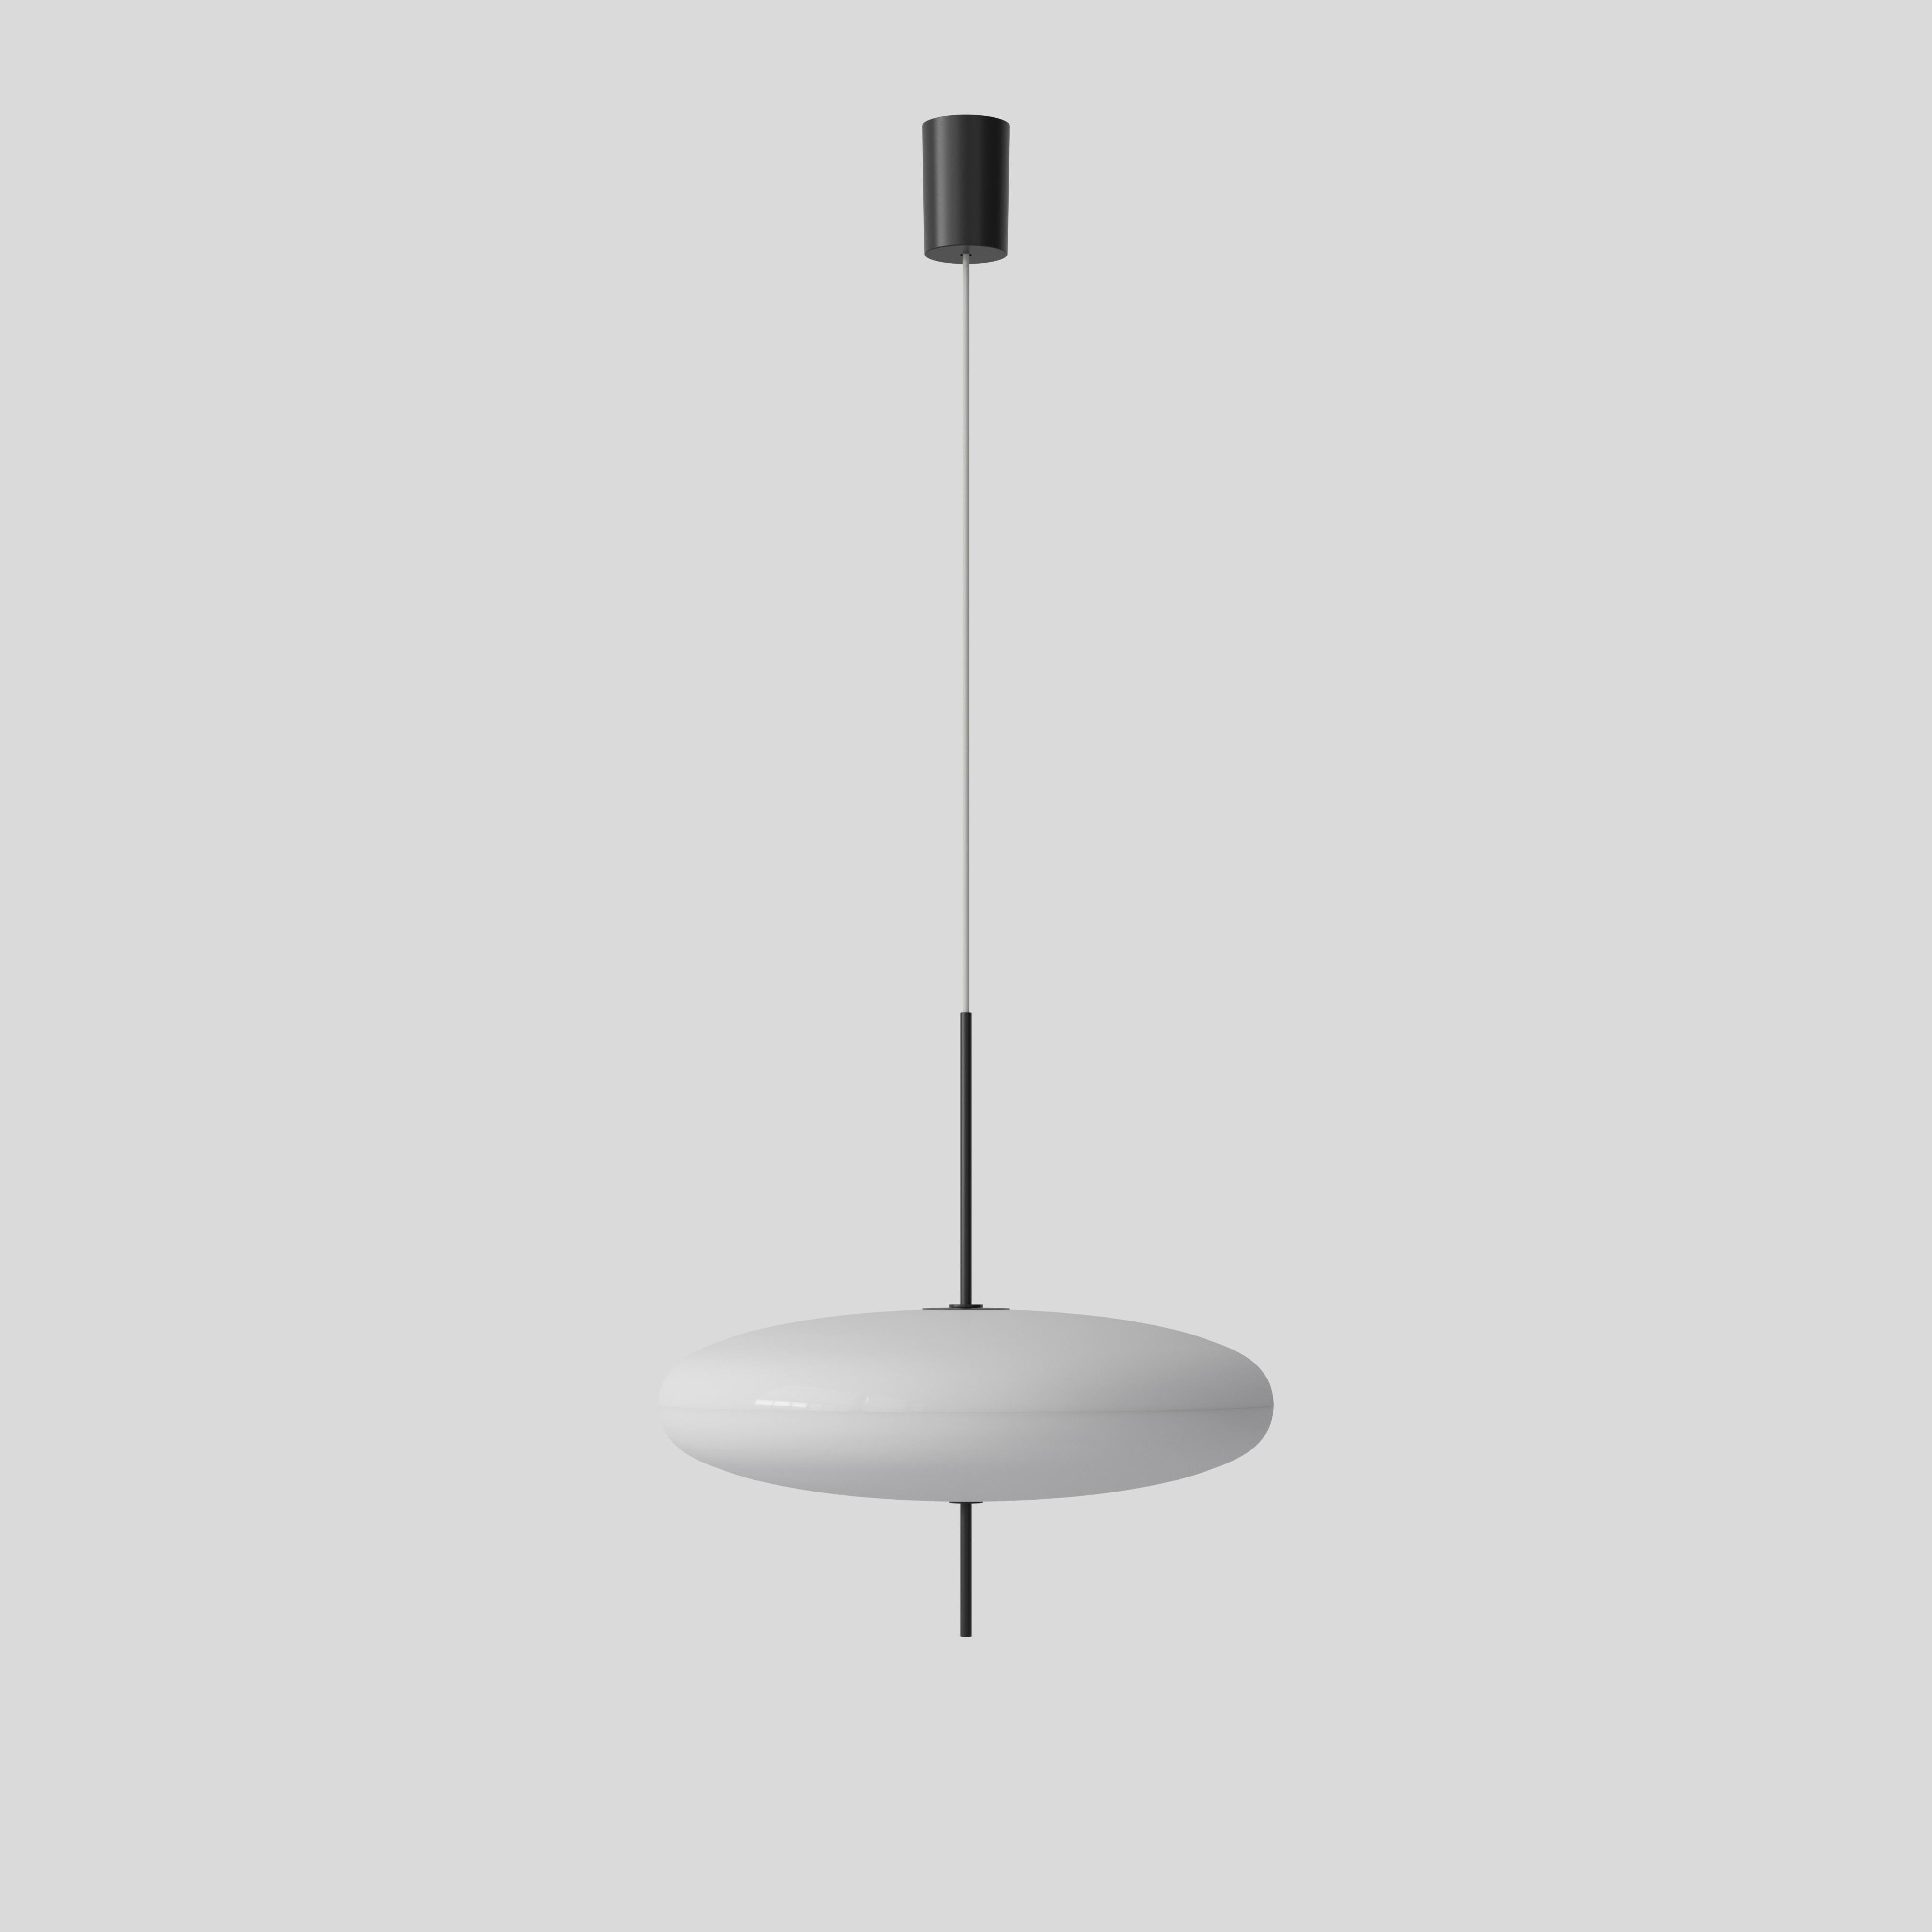 Gino Sarfatti lamp model 2065.
White diffuser, black hardware, white cable.
Manufactured by Astep

Model 2065
Design by Gino Sarfatti
The 2065 is made of two joined opaline methacrylate saucer-shaped diffusers suspended from the ceiling with a black